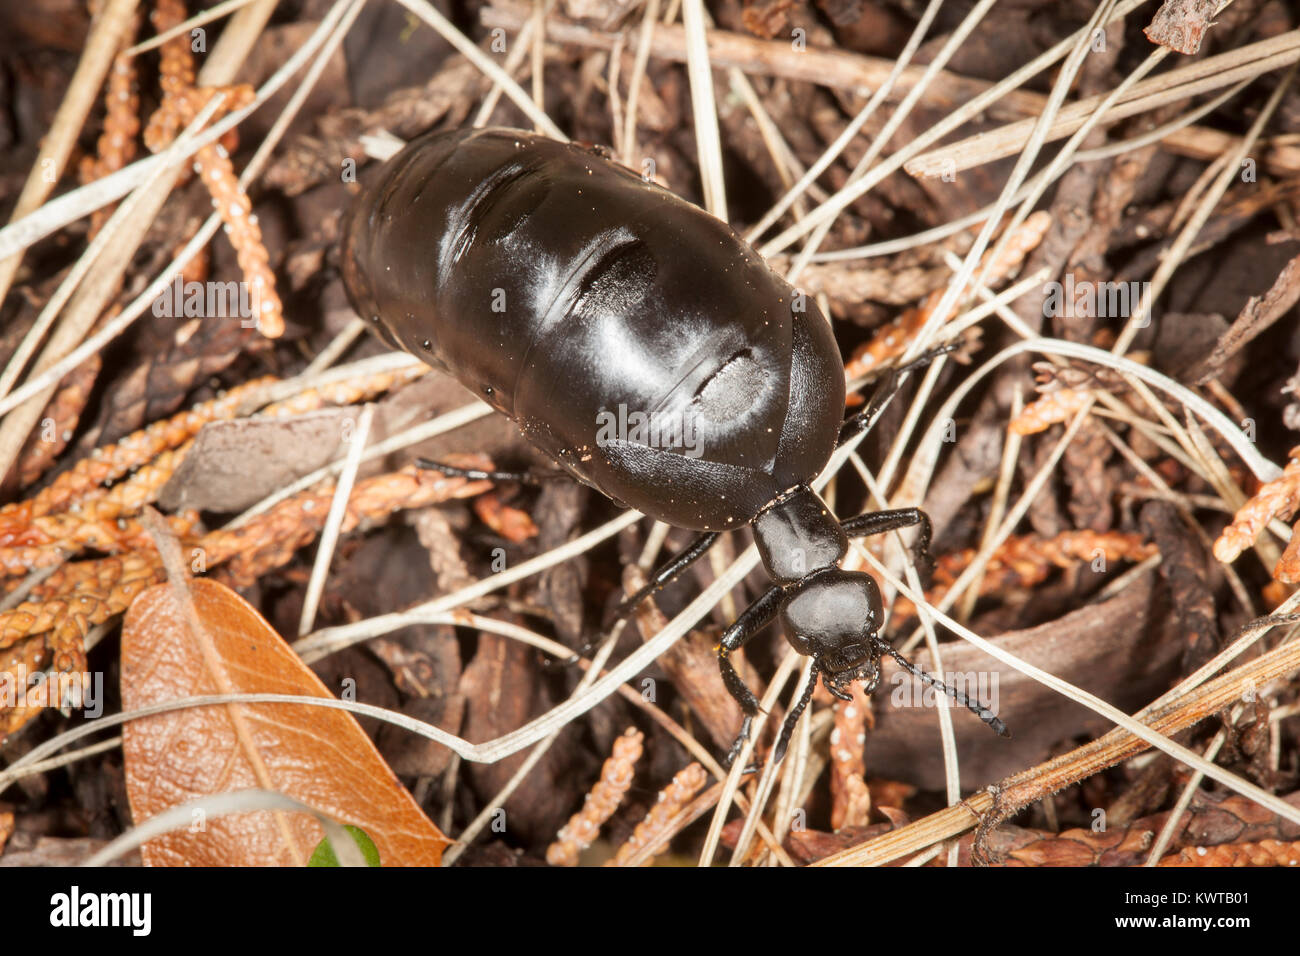 Oil beetle (Meloe sp.), a type of blister beetle (family Meloidae), with a characteristically swollen abdomen. Stock Photo